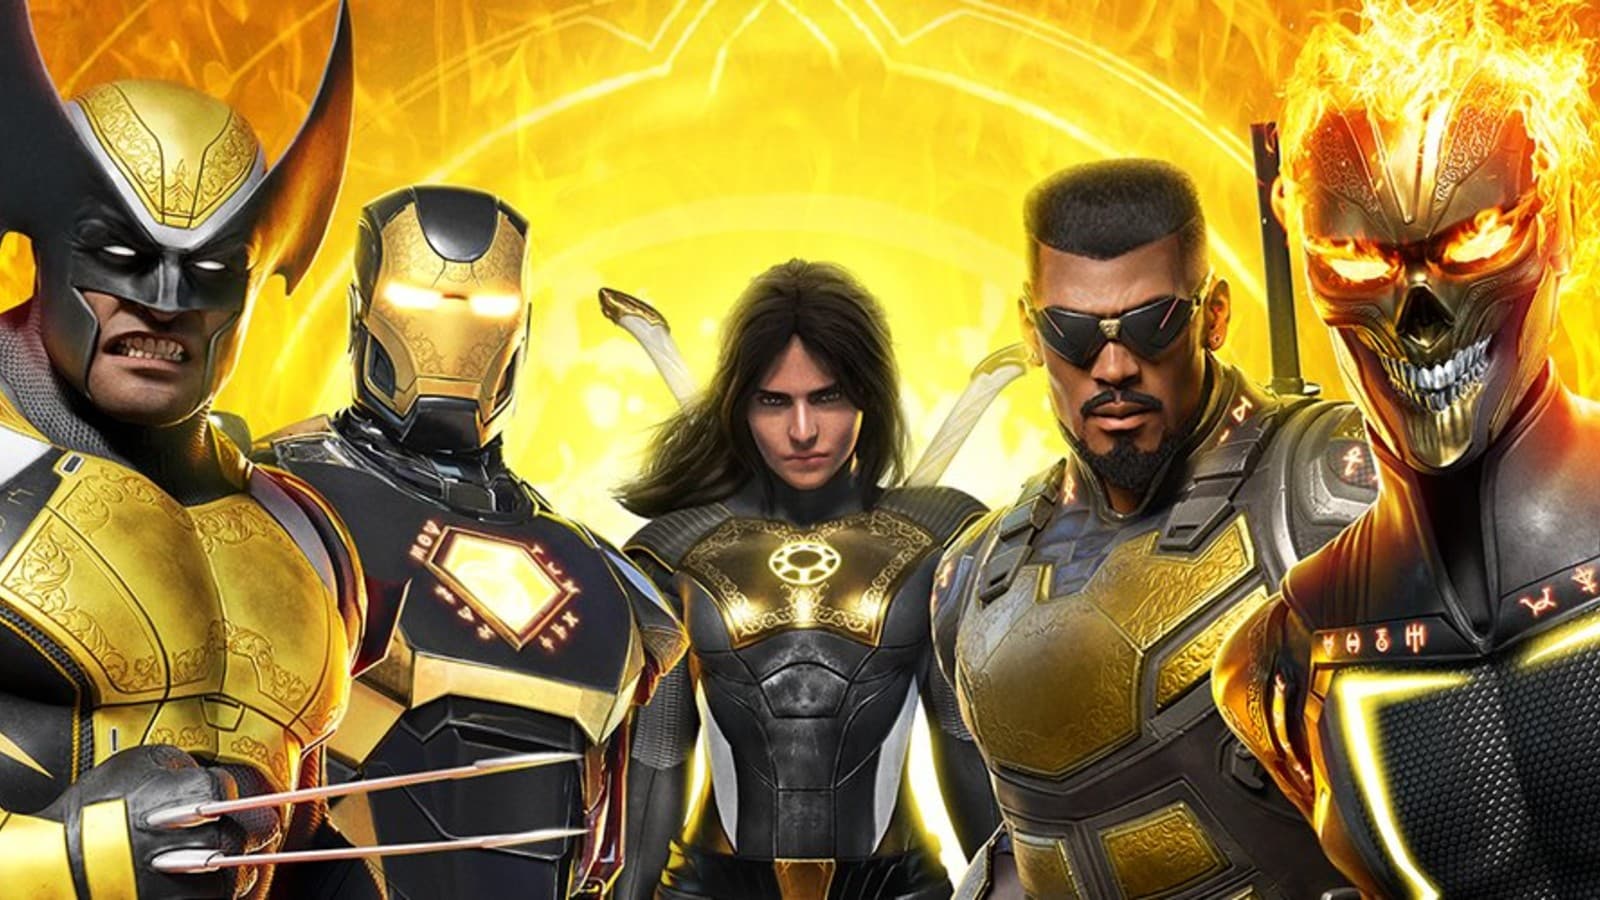 Who Are Marvel's Midnight Suns?